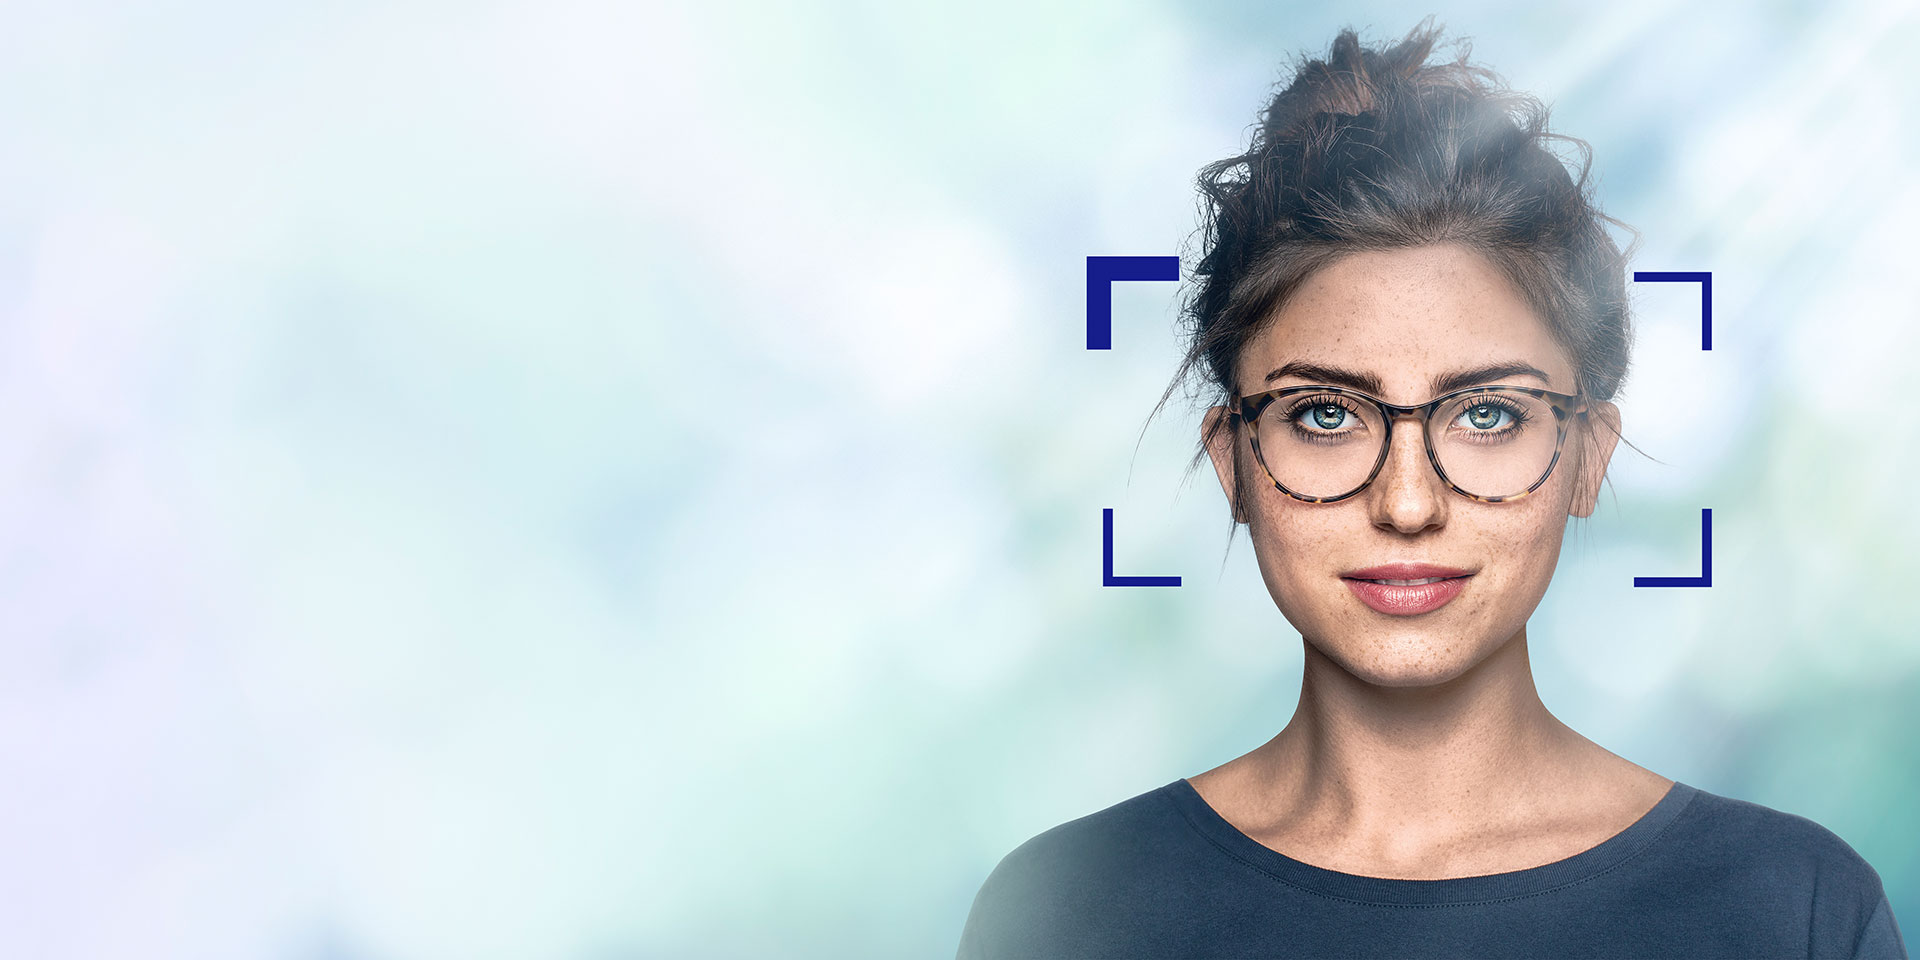 ZEISS UVProtect Technology  Full UV protection in clear lenses